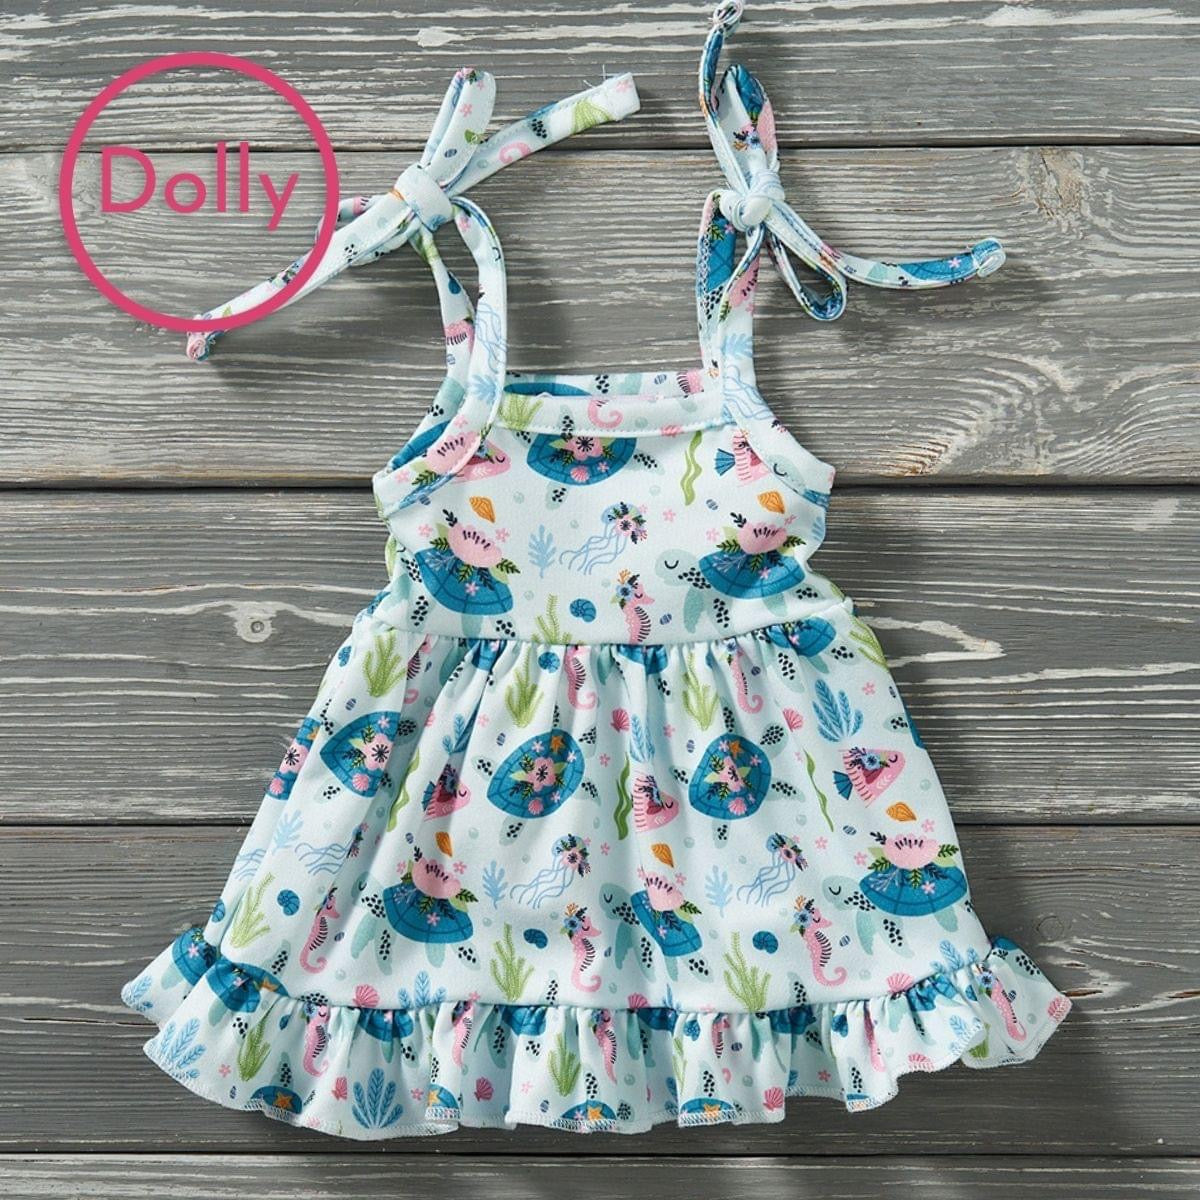 Turtle Bay Dolly Dress by Pete and Lucy